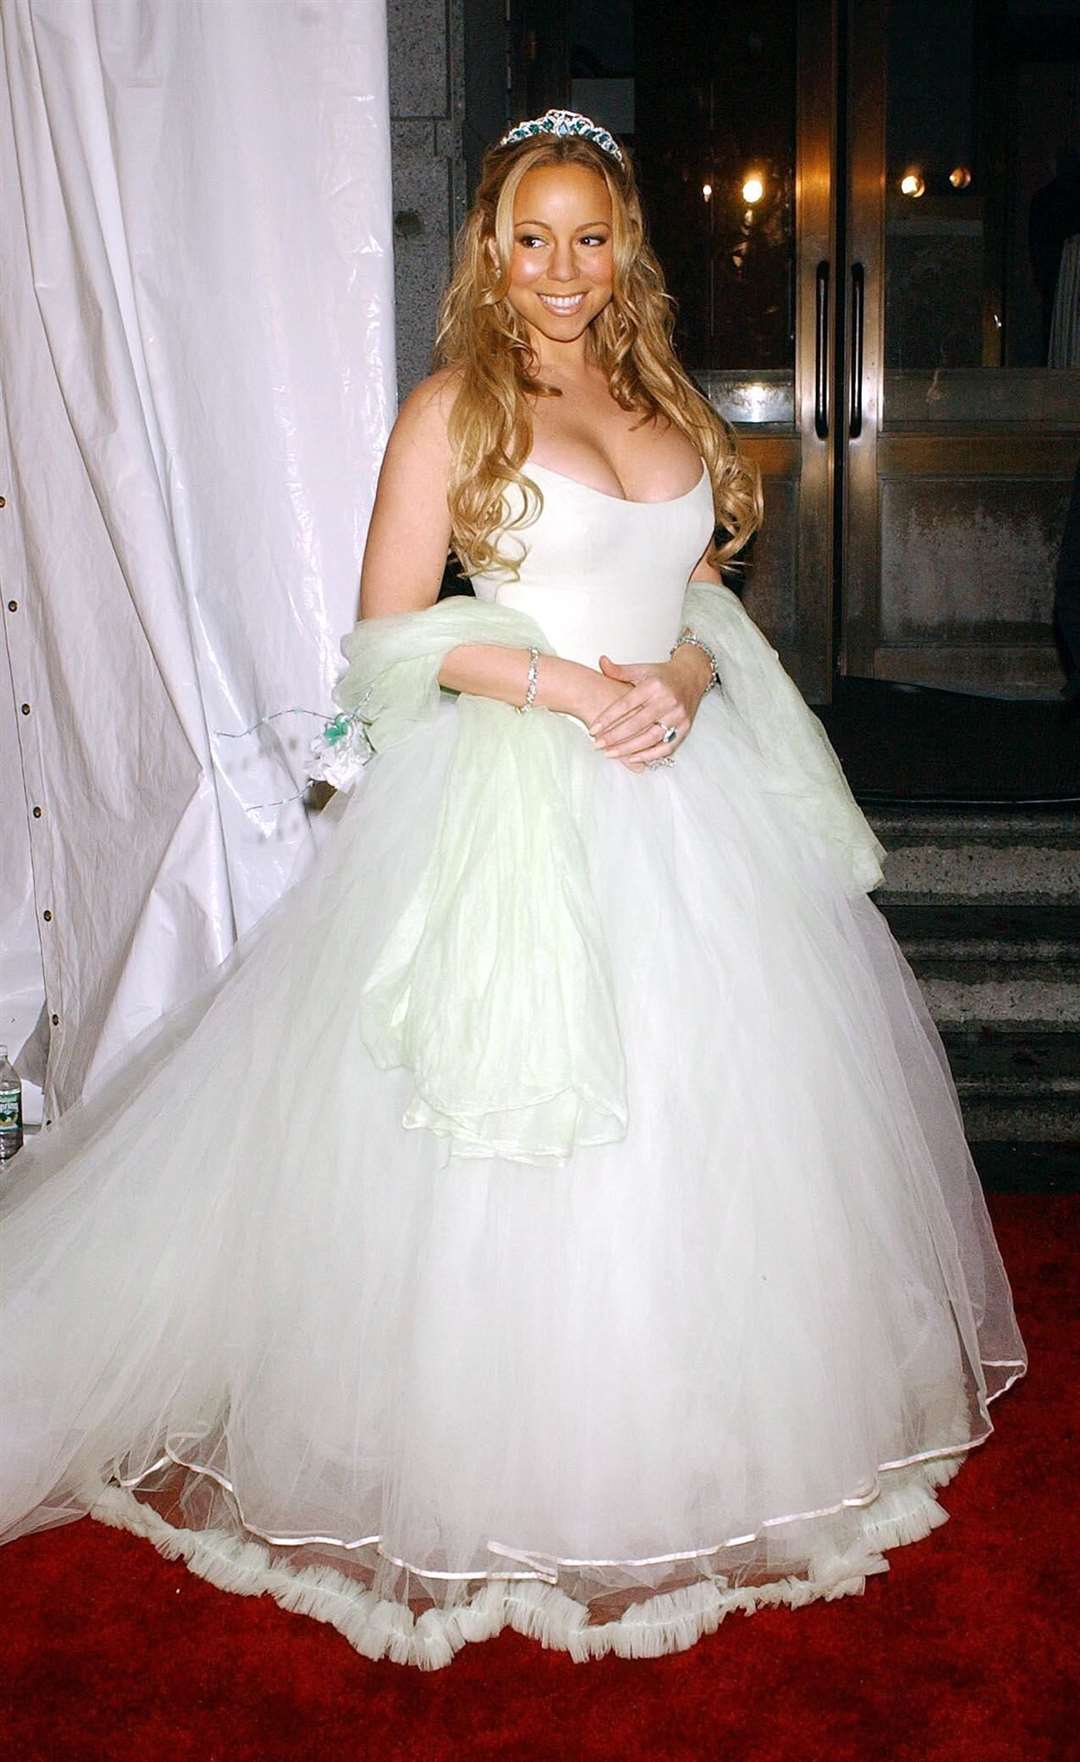 Mariah Carey wearing a Vera Wang gown, at Sean “P. Diddy” Combs’ 35th Birthday Ball in 2004 (Rich Lee/PA)